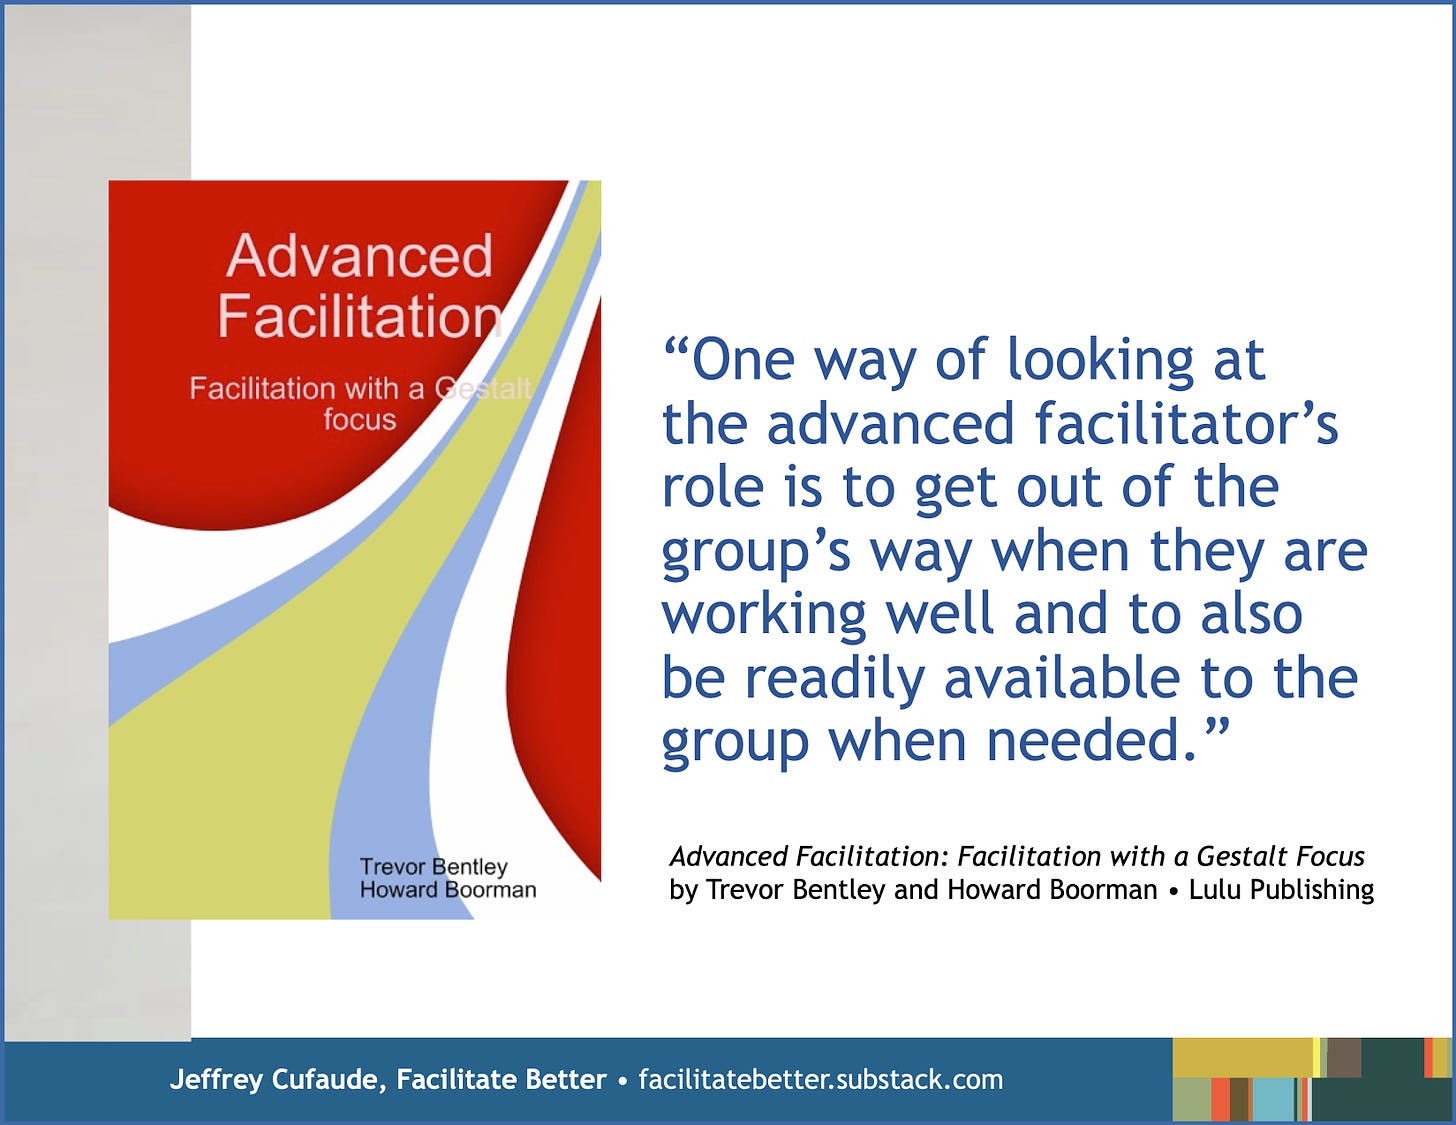 Large image of the book jacket for Advanced Facilitation: Facilitation with a Gestalt Focus by Trevor Bentley and Howard Boorman.  Adjacent to this image is a quote from the book: “One way of looking at the advanced facilitator’s role is to get out of the group’s way when they are working well and to also be readily available to the group when needed.”